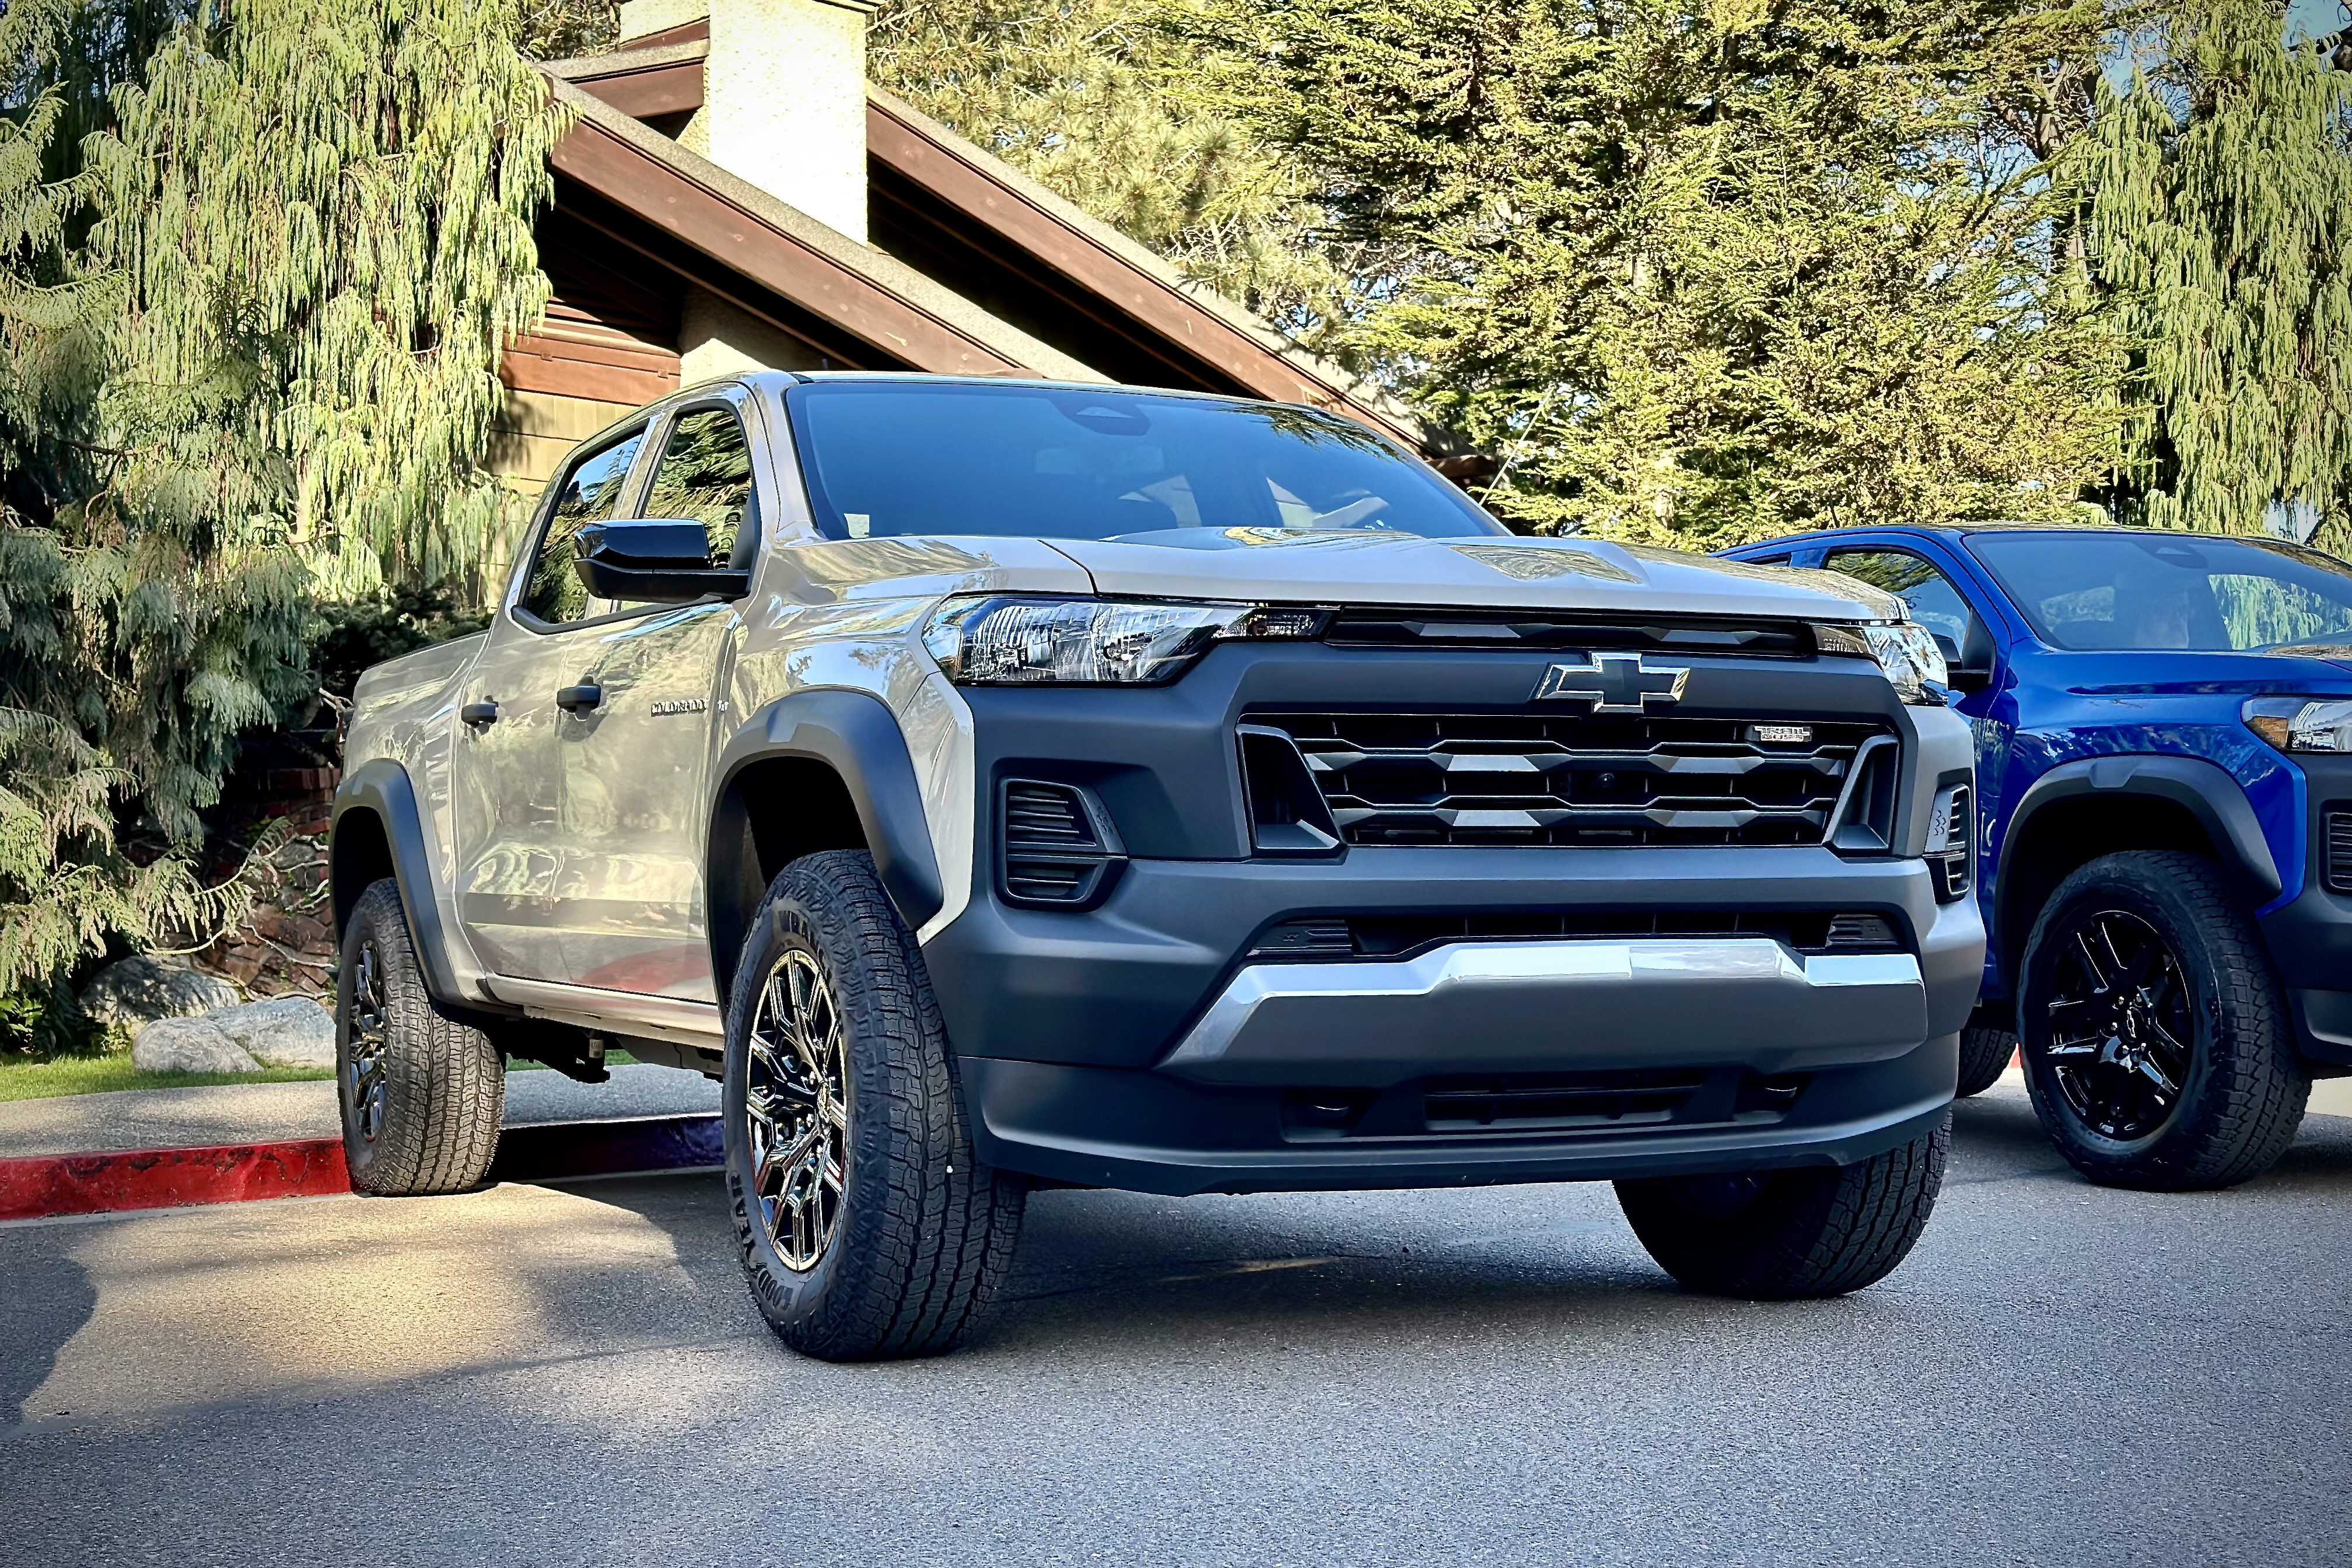 Front end close up of the 2023 Chevrolet Colorado Trail Boss parked in front of a lodge with trees.